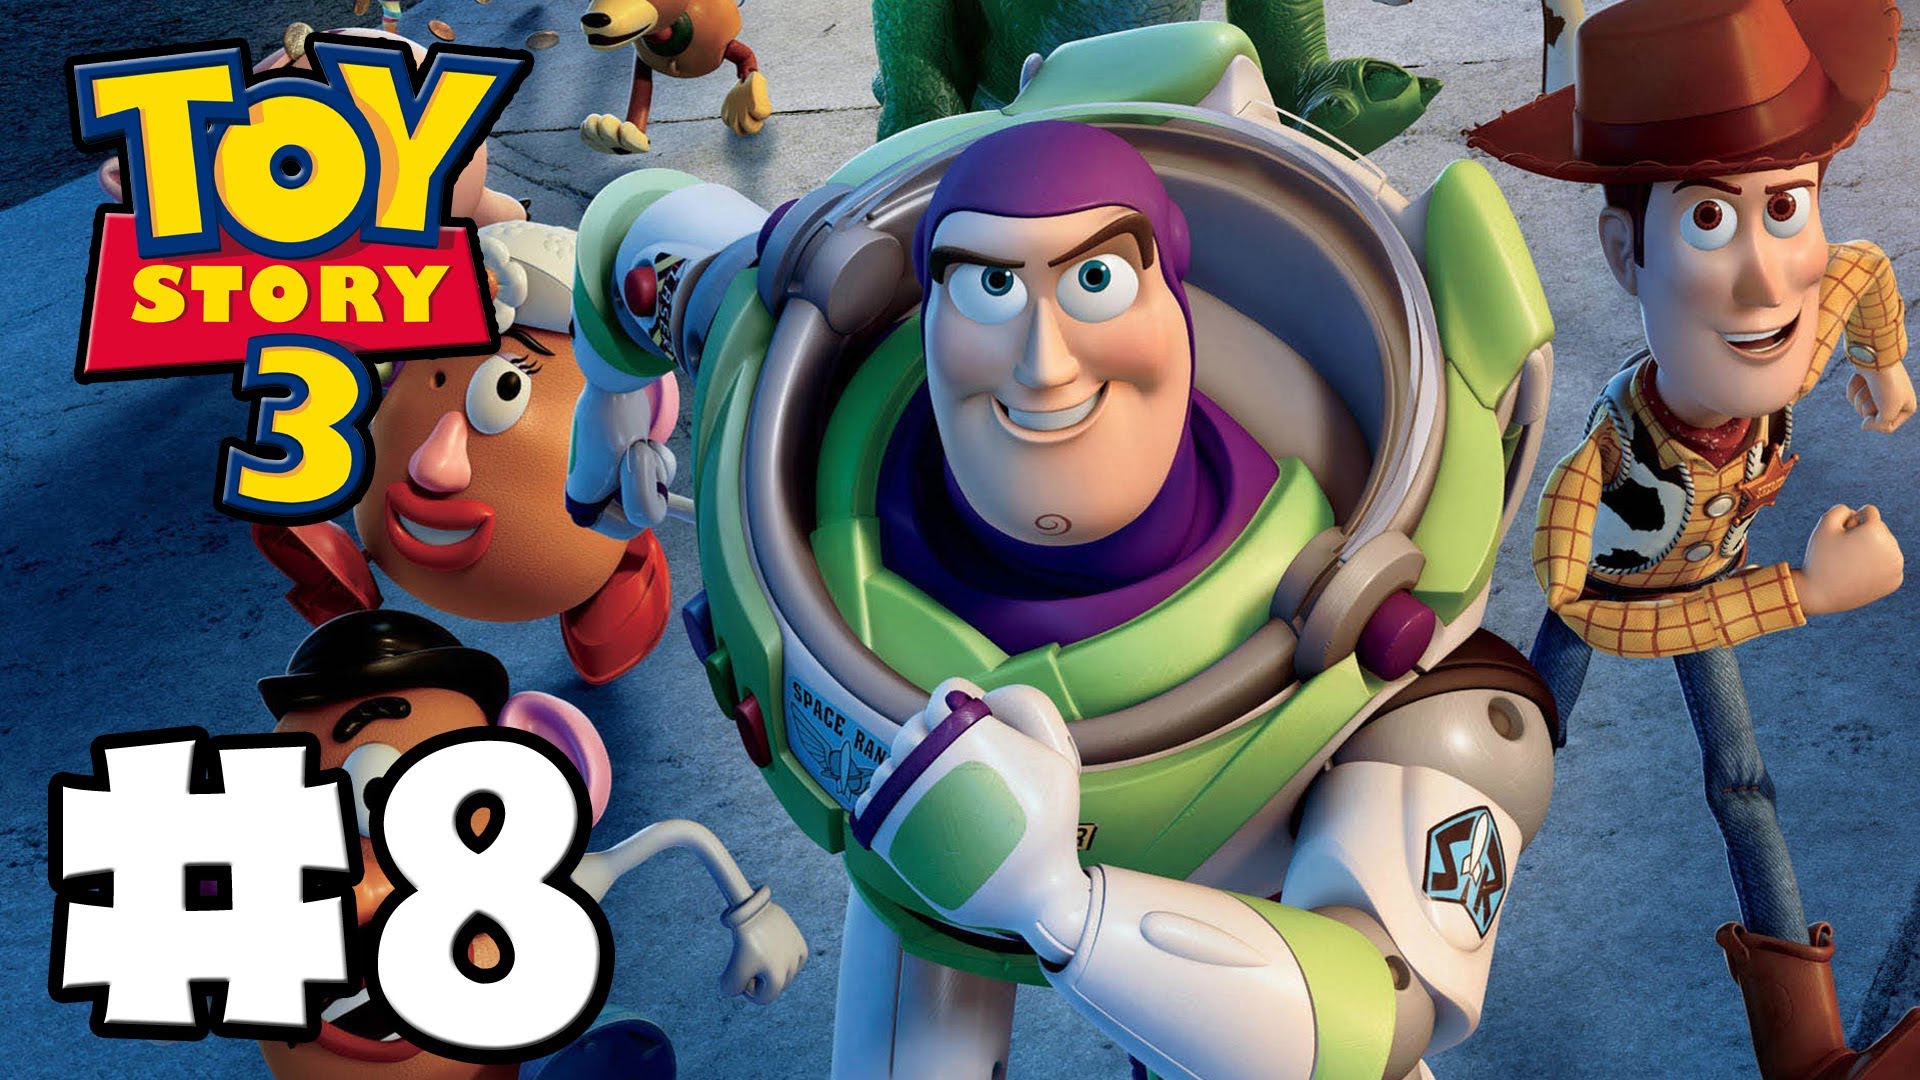 Toy Story 3 The Video-Game - Toy Box Mode - Episode 8 (HD Gameplay ...